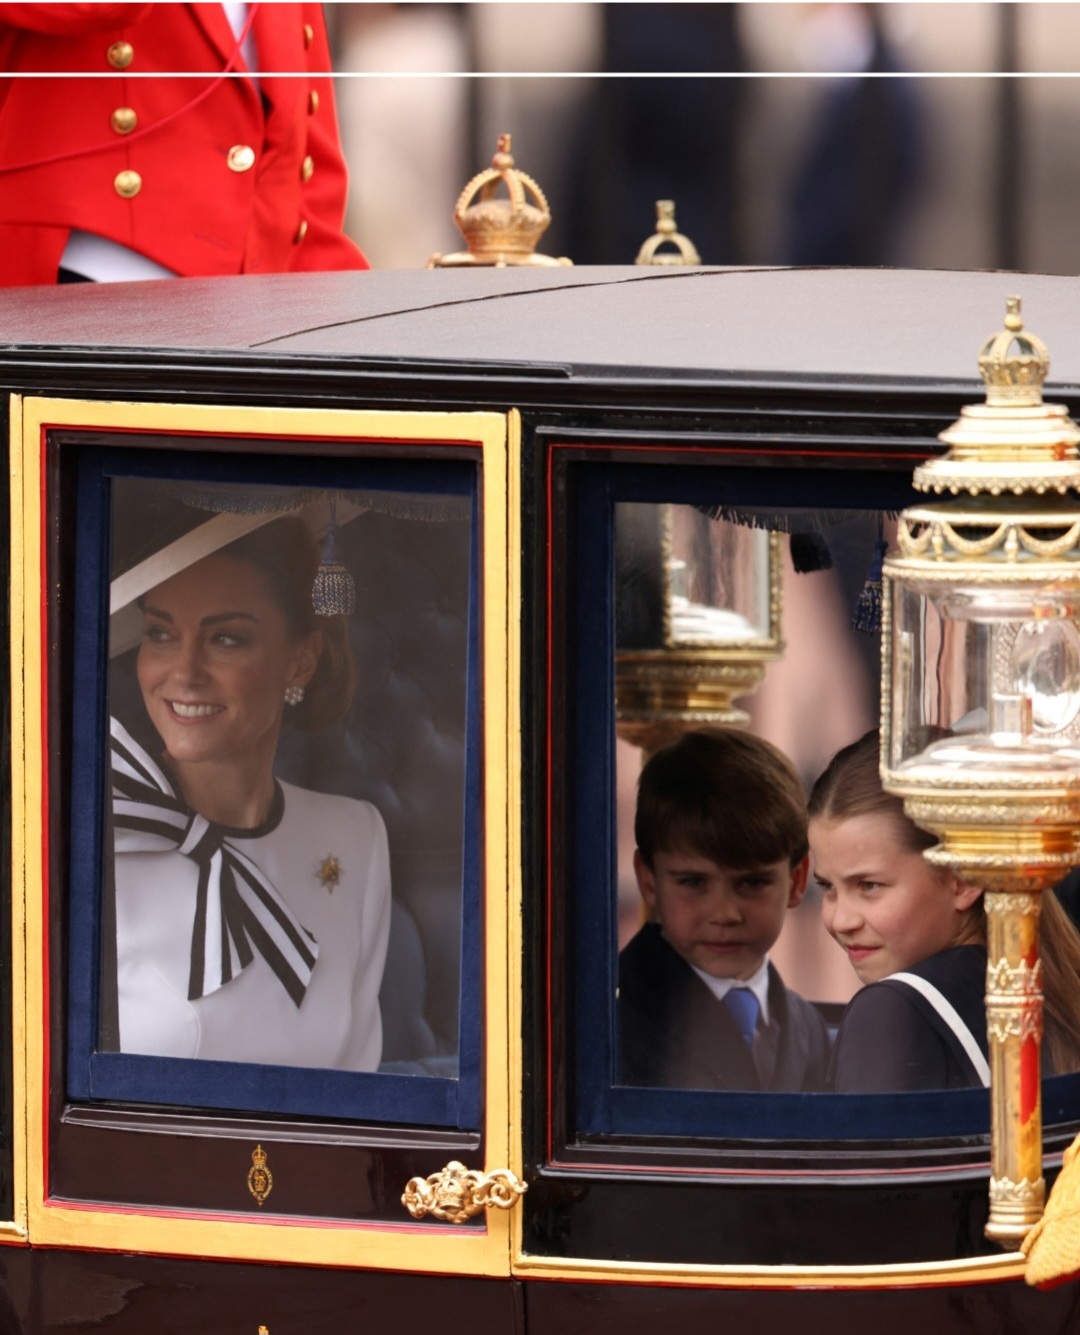 Kate Middleton makes first public appearance since cancer diagnosis as she attends Trooping the Colour (photos/videos)